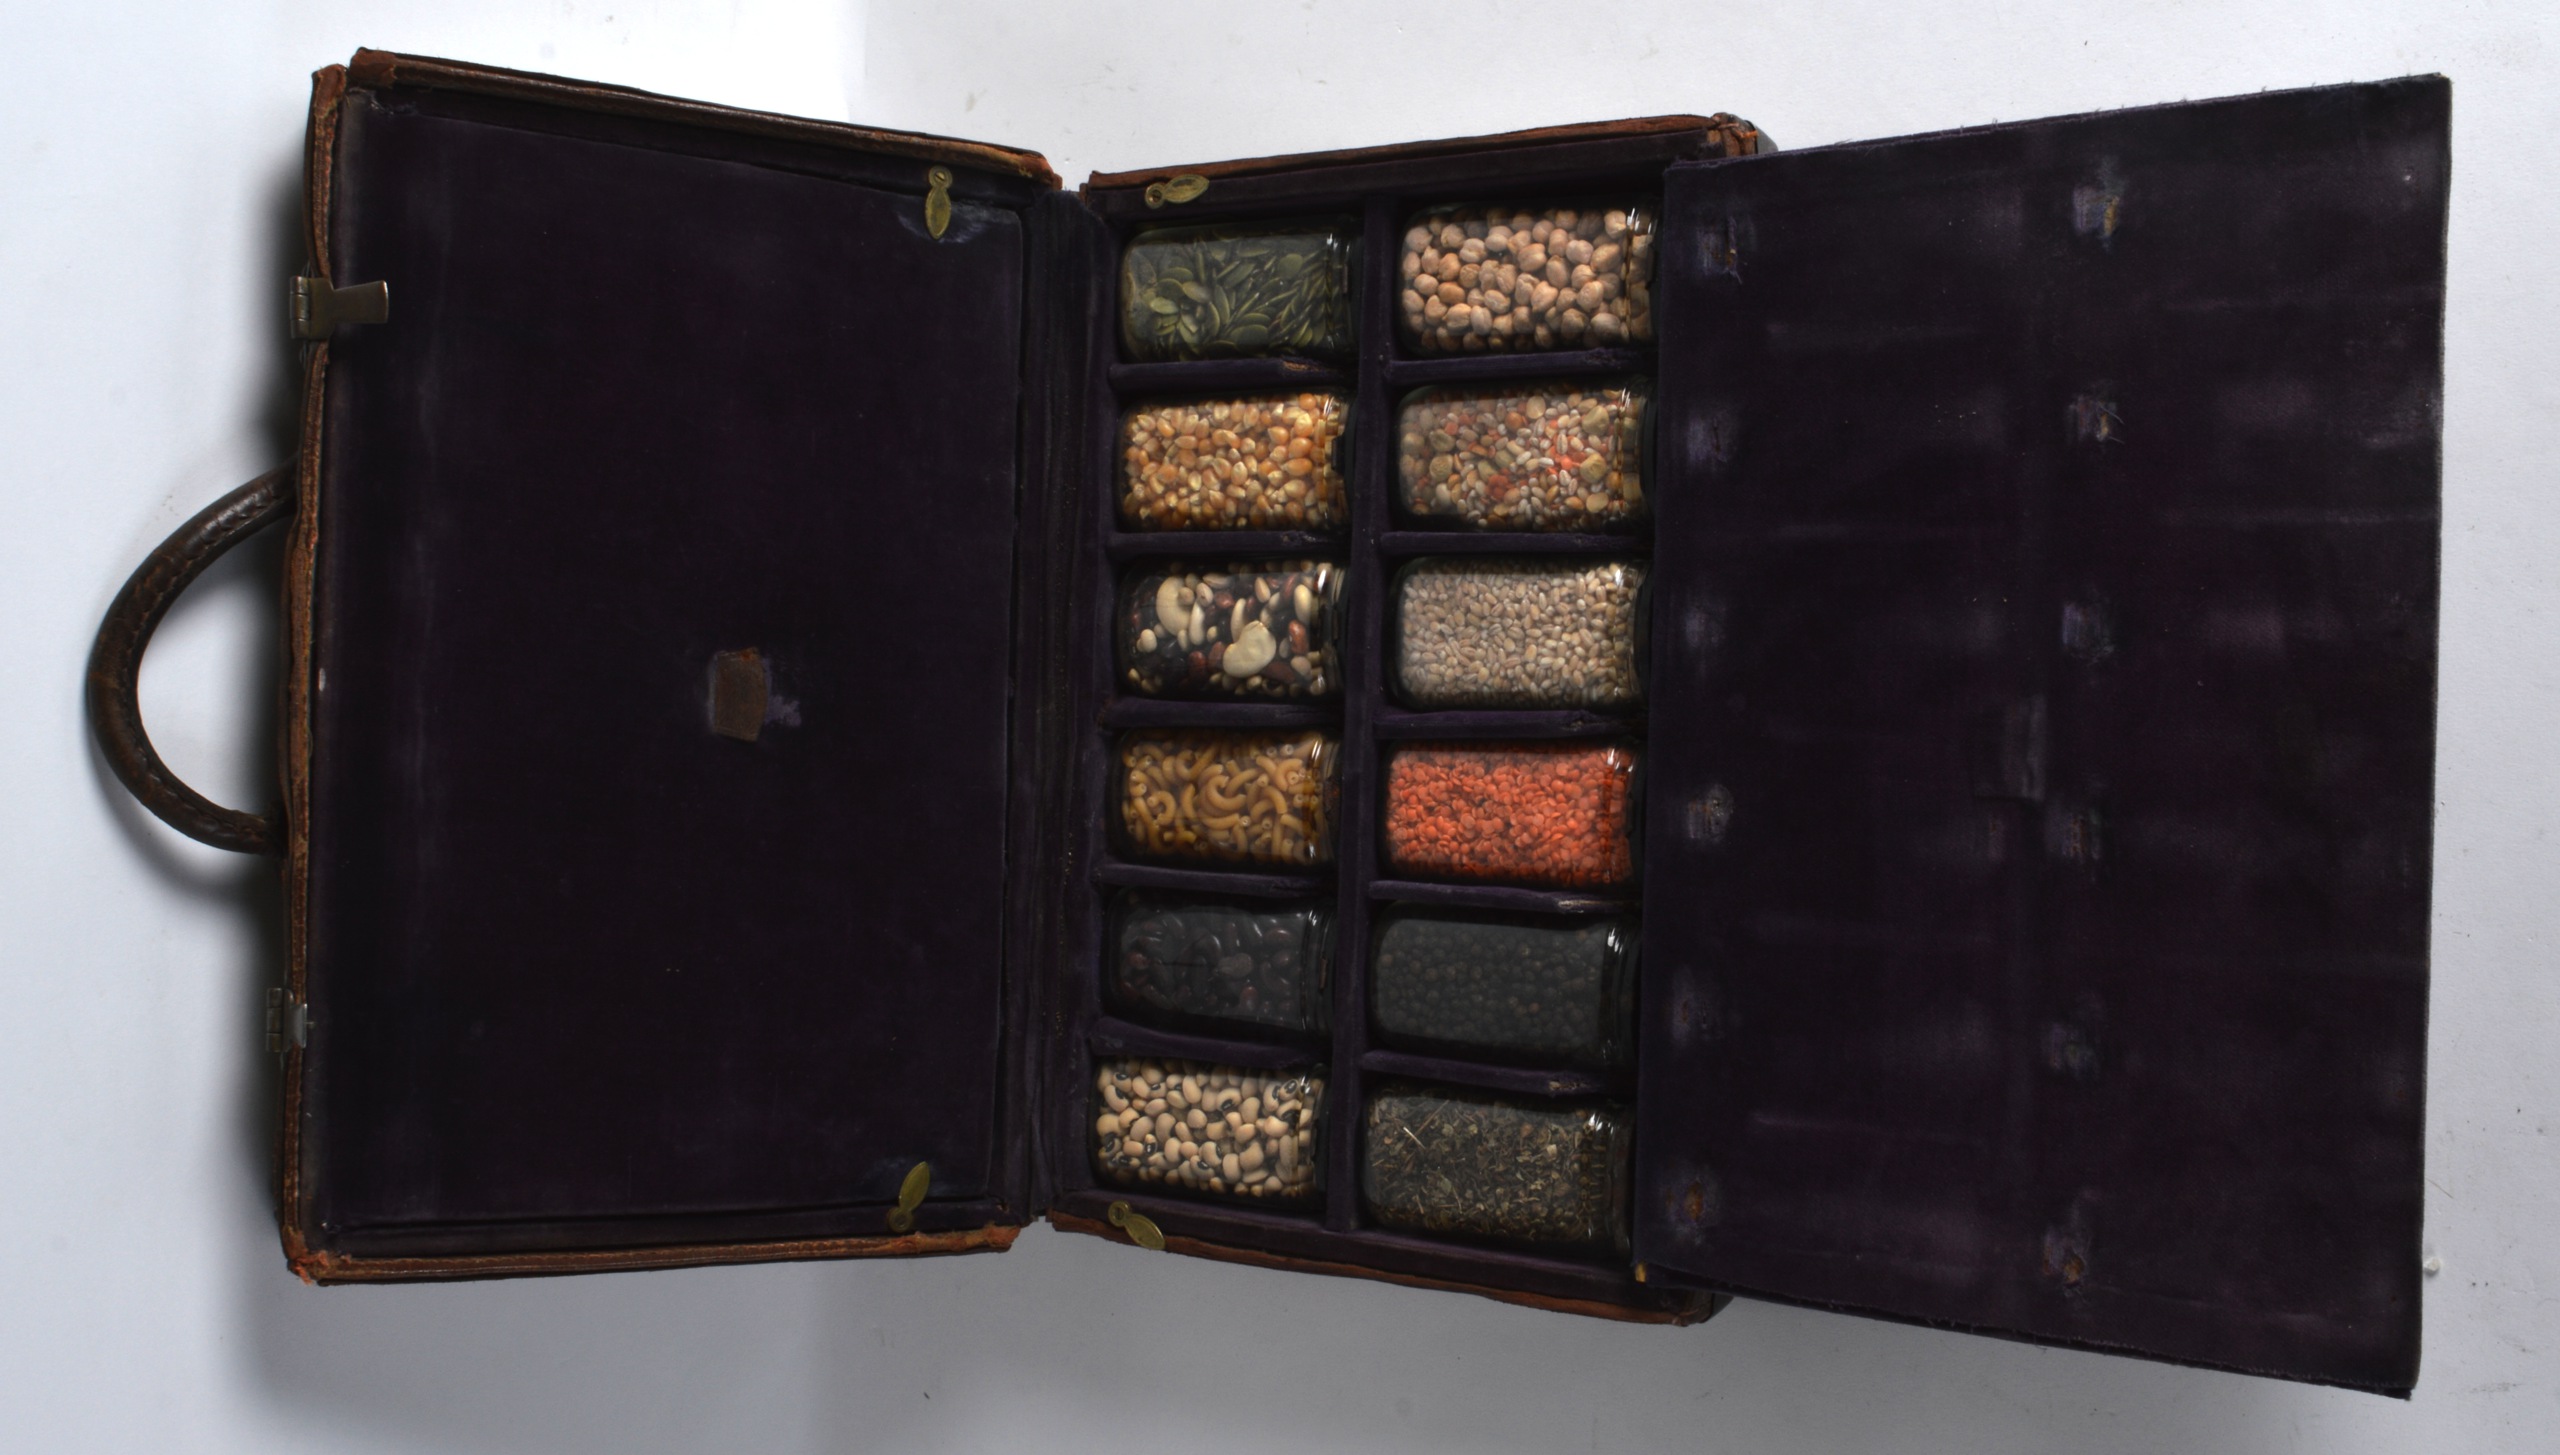 AN ANTIQUE LEATHER TRAVELLING SPICE CASE with some specimen jars still intact.